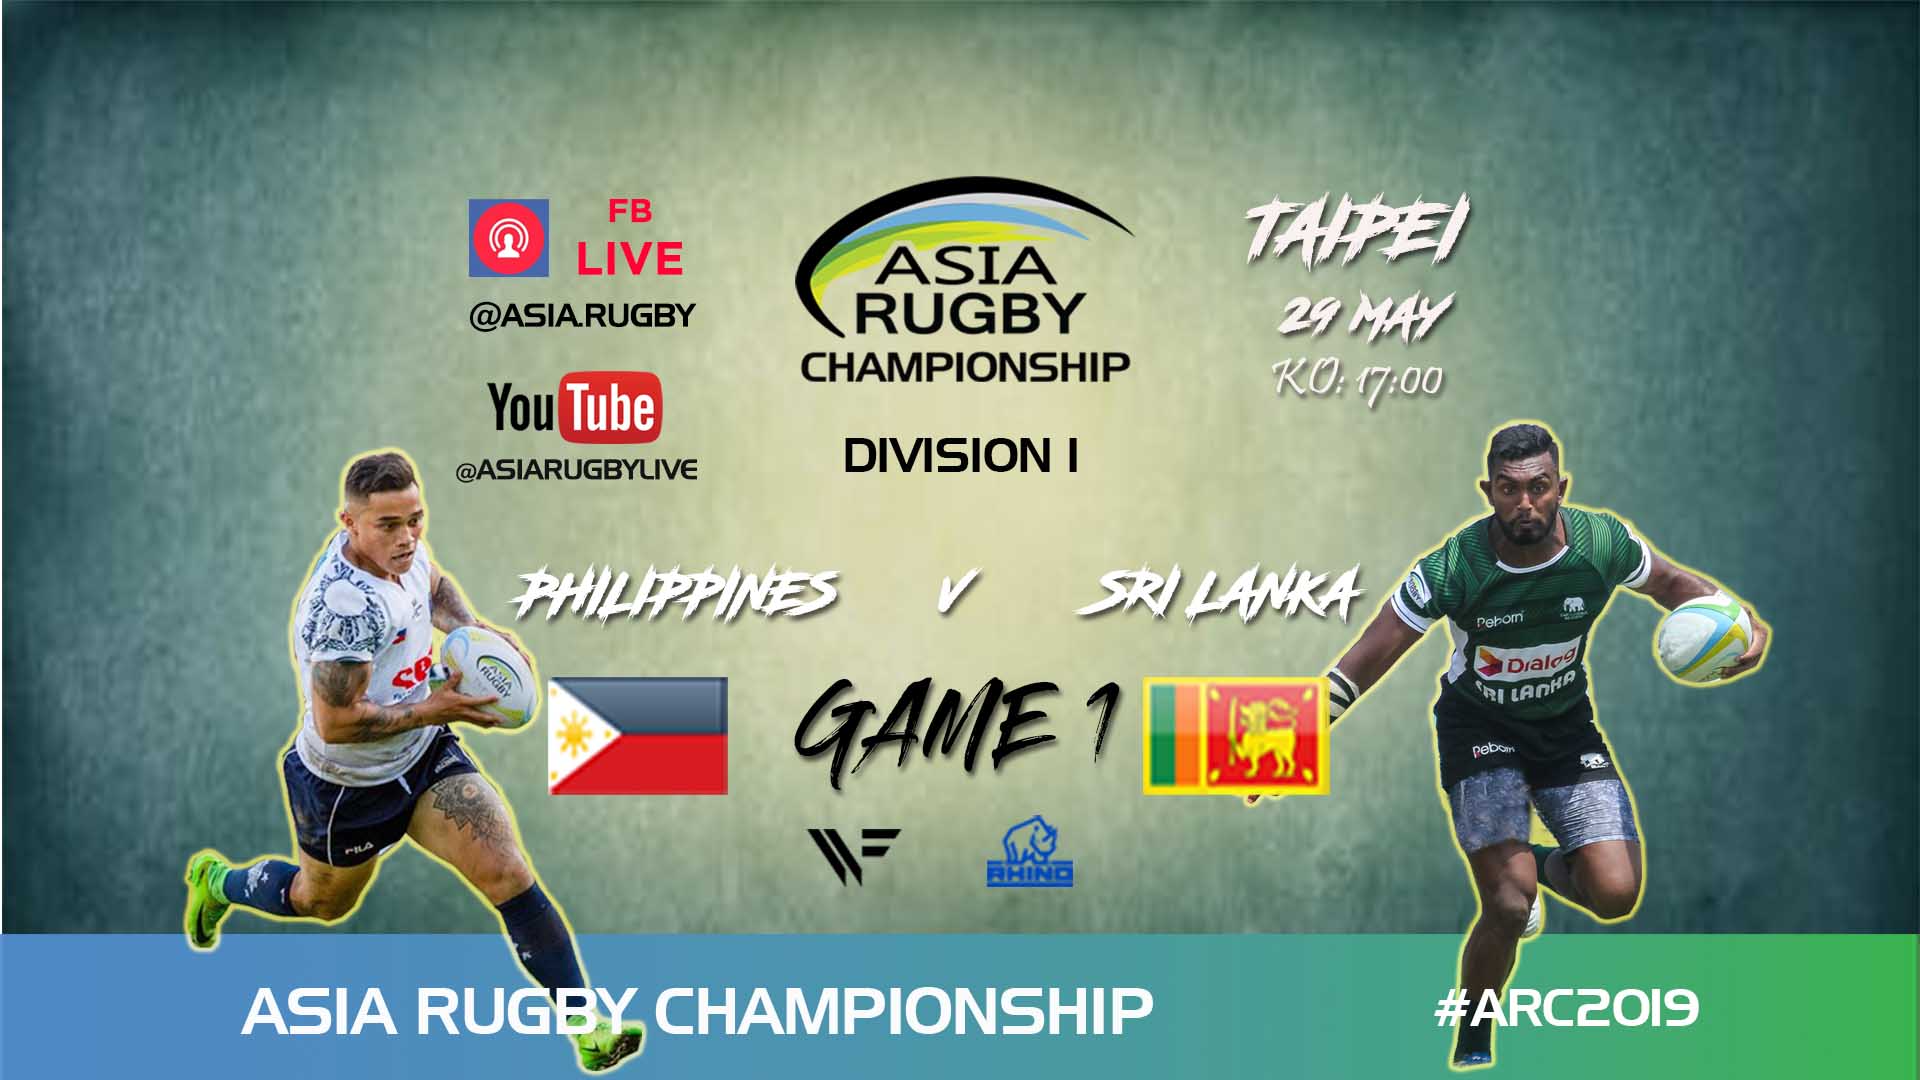 asia rugby live